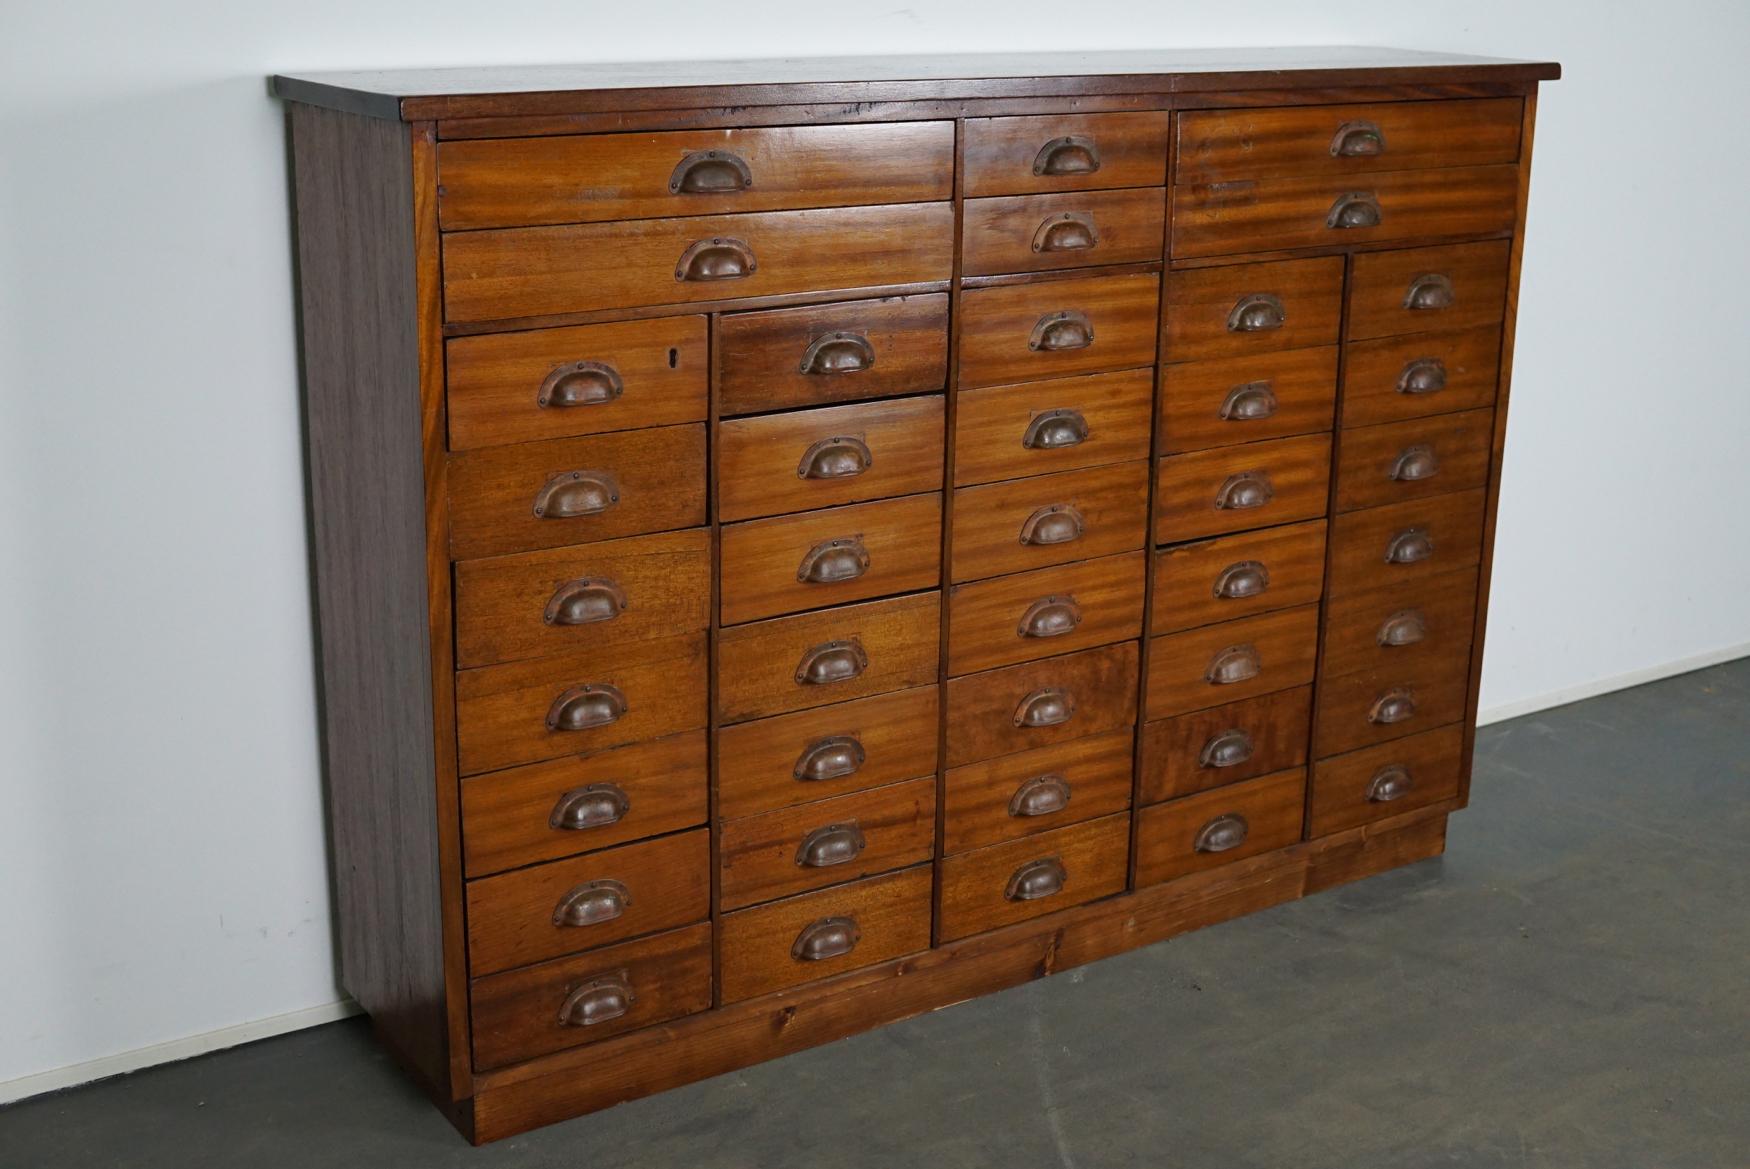 This vintage mahogany bank of drawers dates from the 1930s and was made in England. It features a solid wooden frame, the drawers are mahogany veneered with metal cup handles.